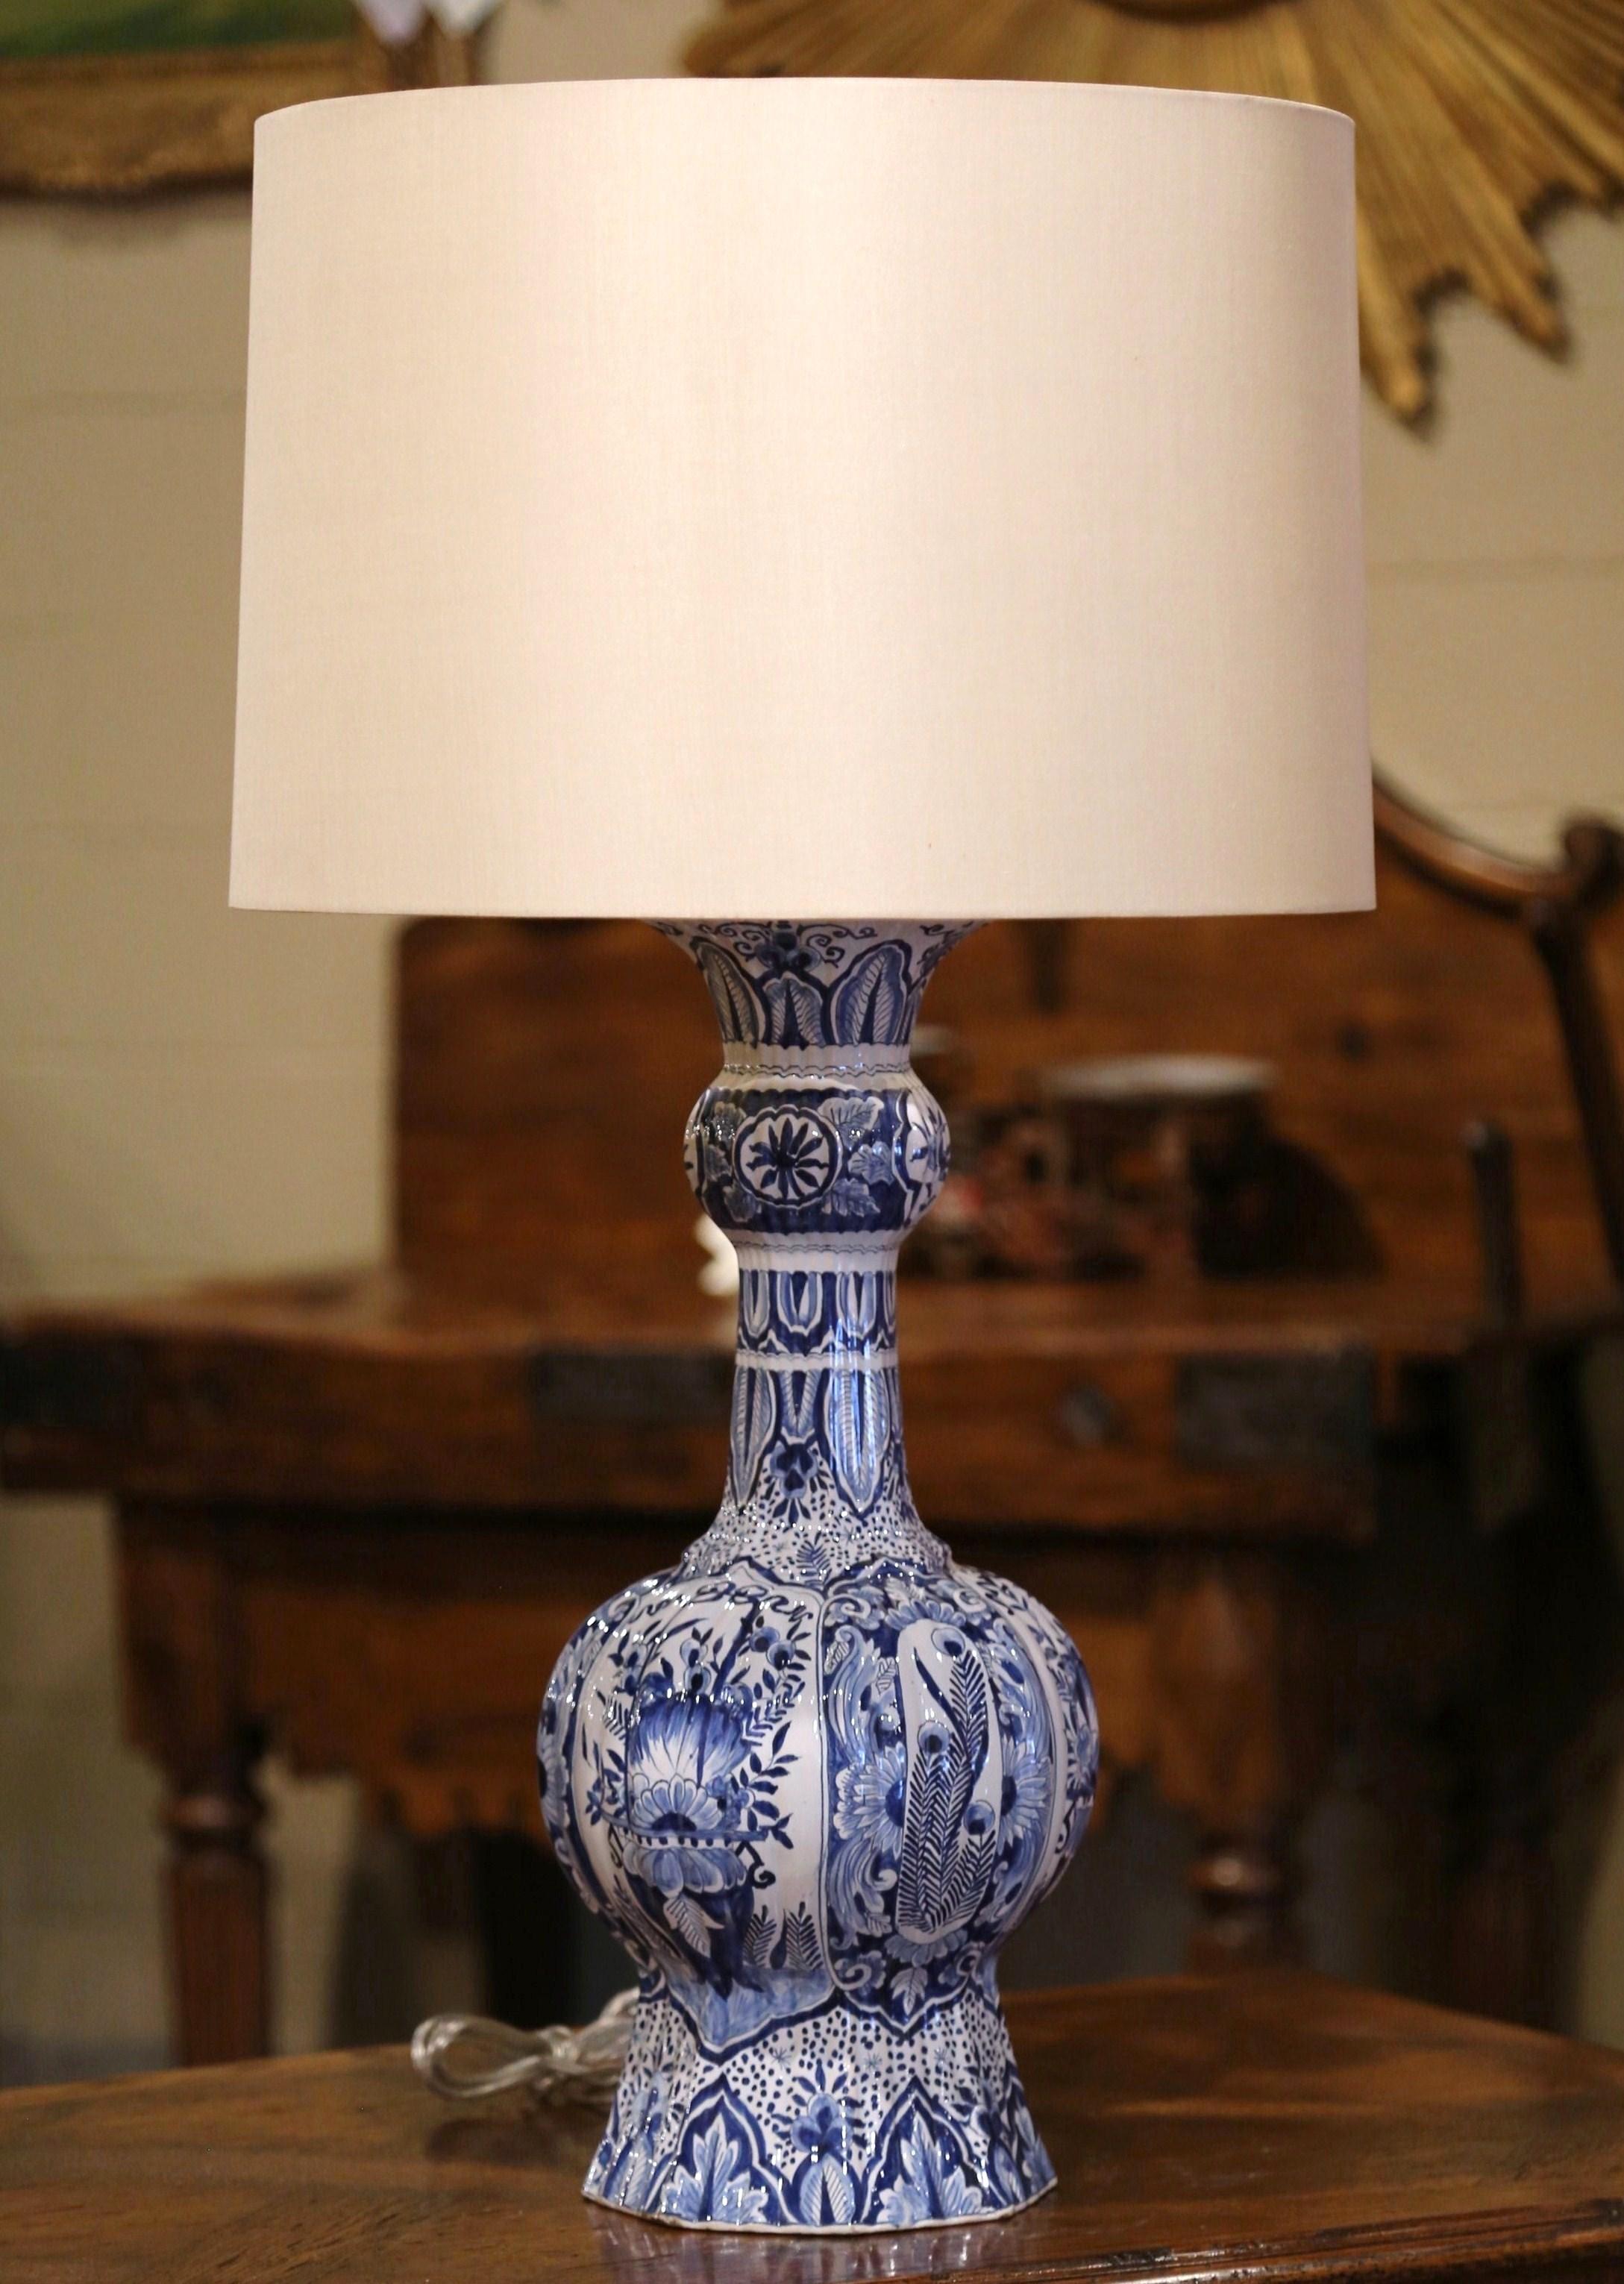 Decorate a console or a commode with this elegant antique lamp base, crafted in France, circa 1880, the tall colorful faience lamp has new wiring with two lights and is hand painted with floral and leaf motifs in the traditional blue and white delft